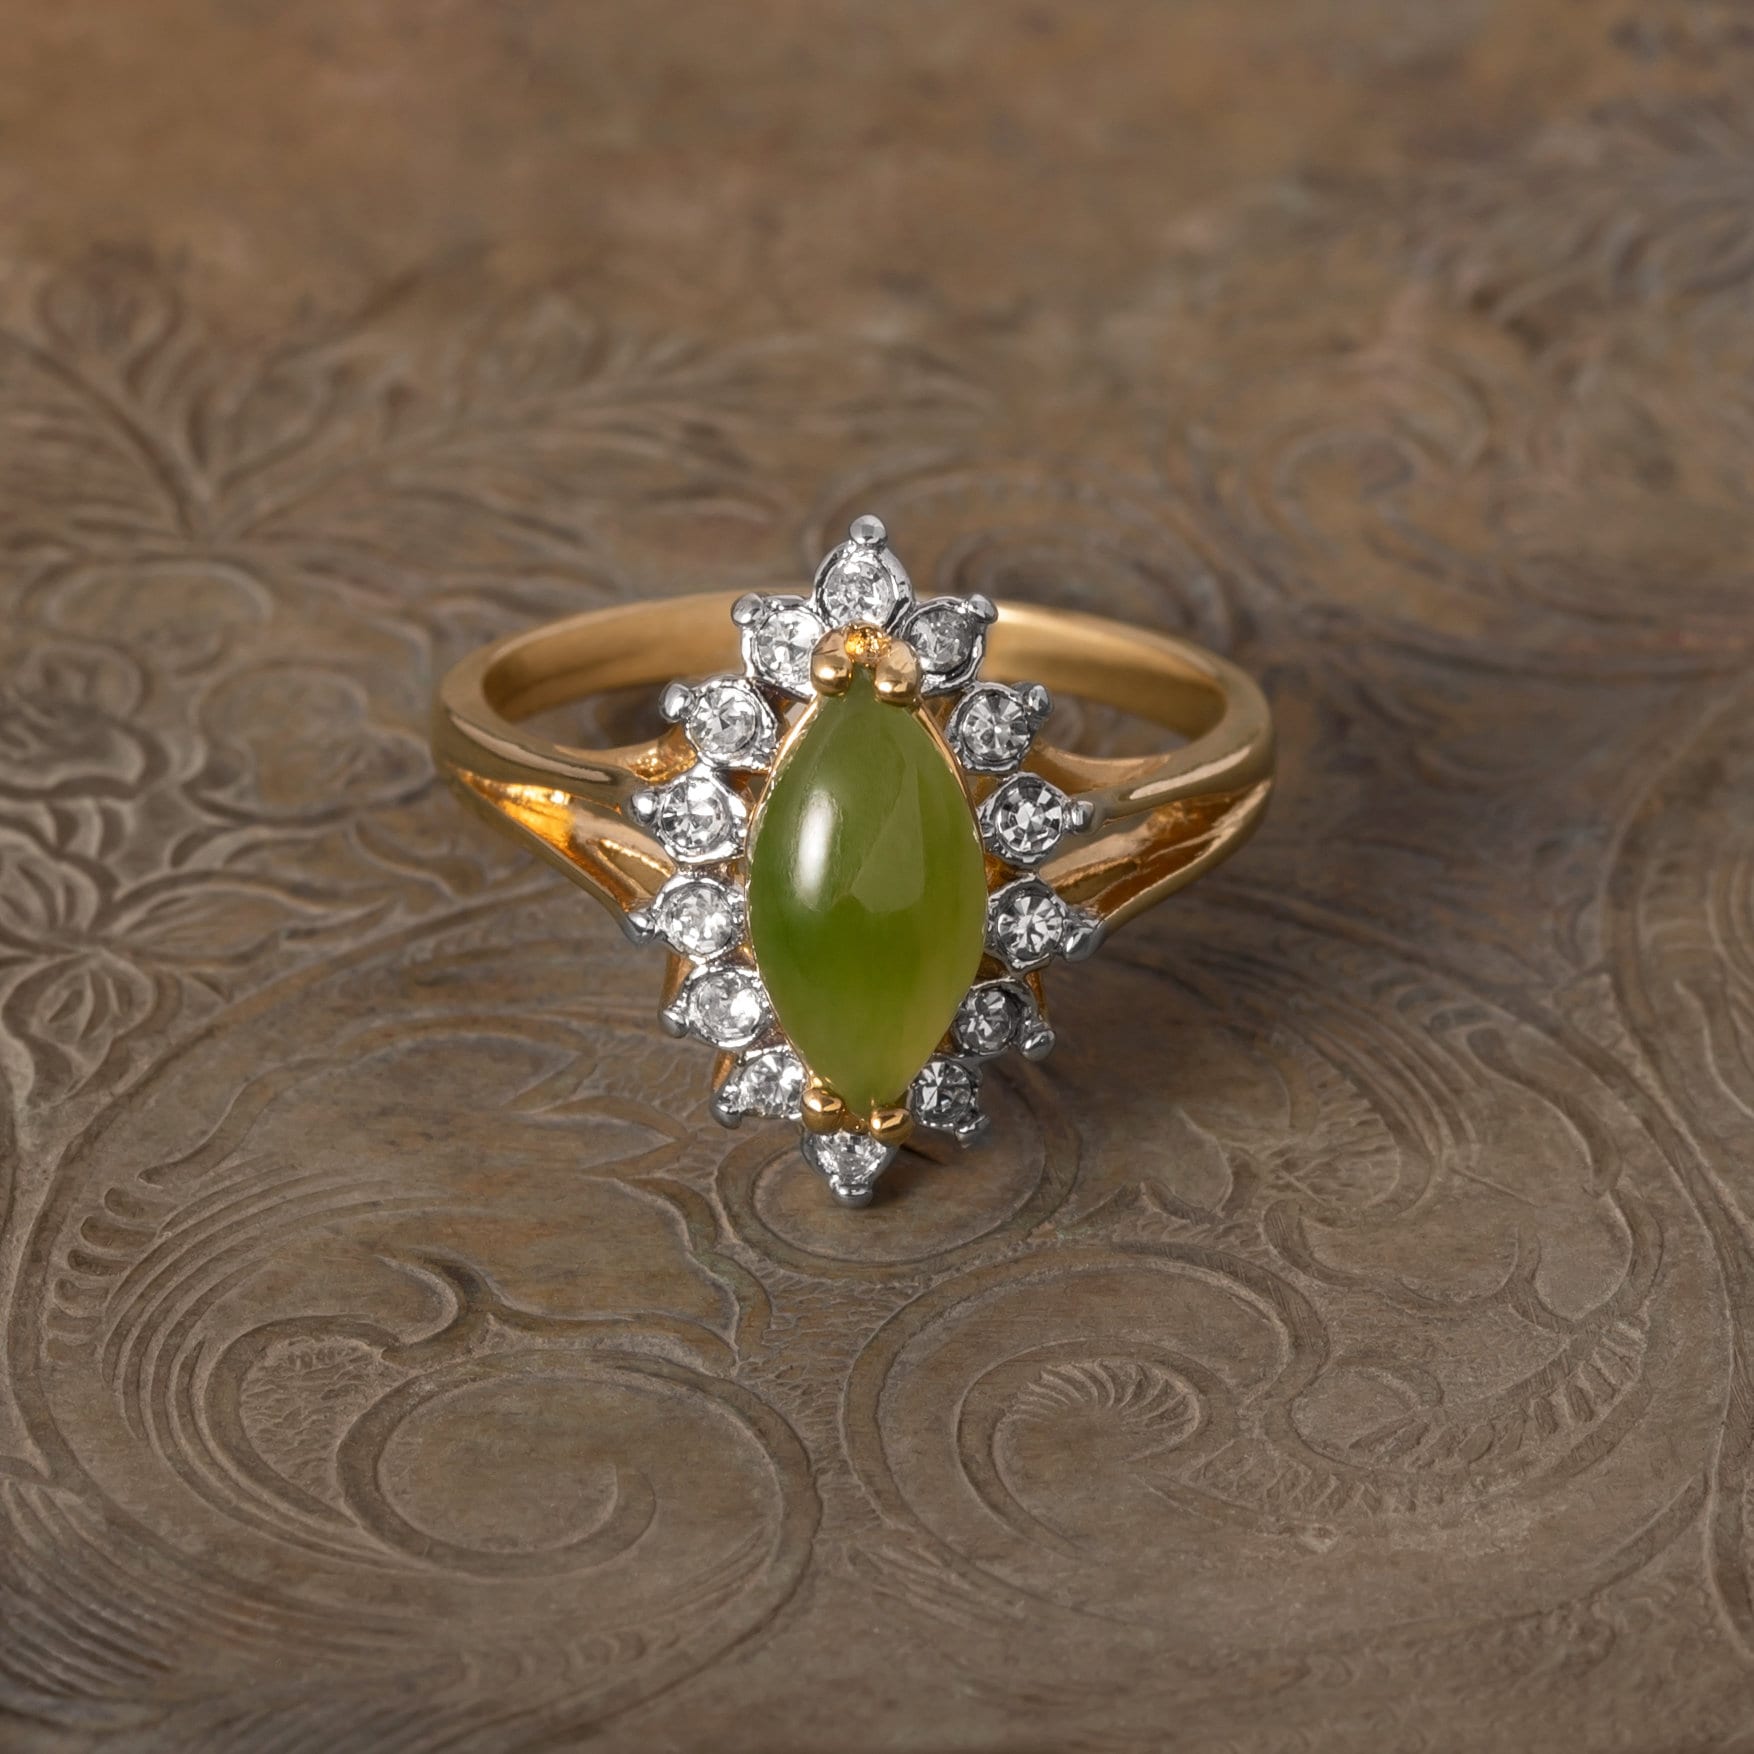 Vintage Ring Genuine Jade and Clear Swarovski Crystals 18k Gold Plated August Birthstone Antique Woman #R1891 - Limited Stock - Never Worn